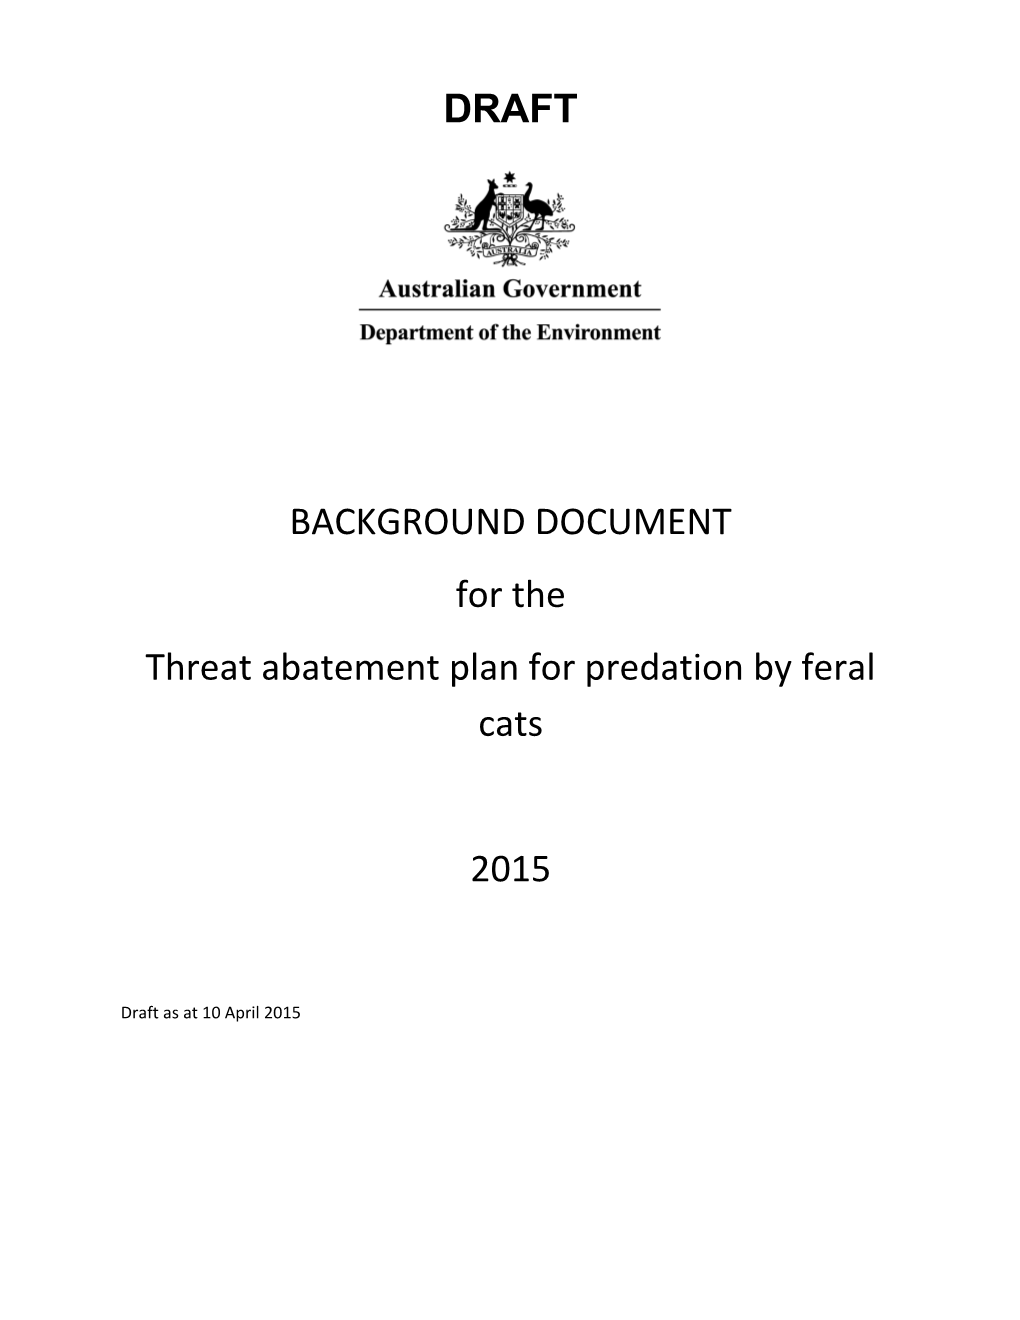 Background Document for the Threat Abatement Plan for Predation by Feral Cats